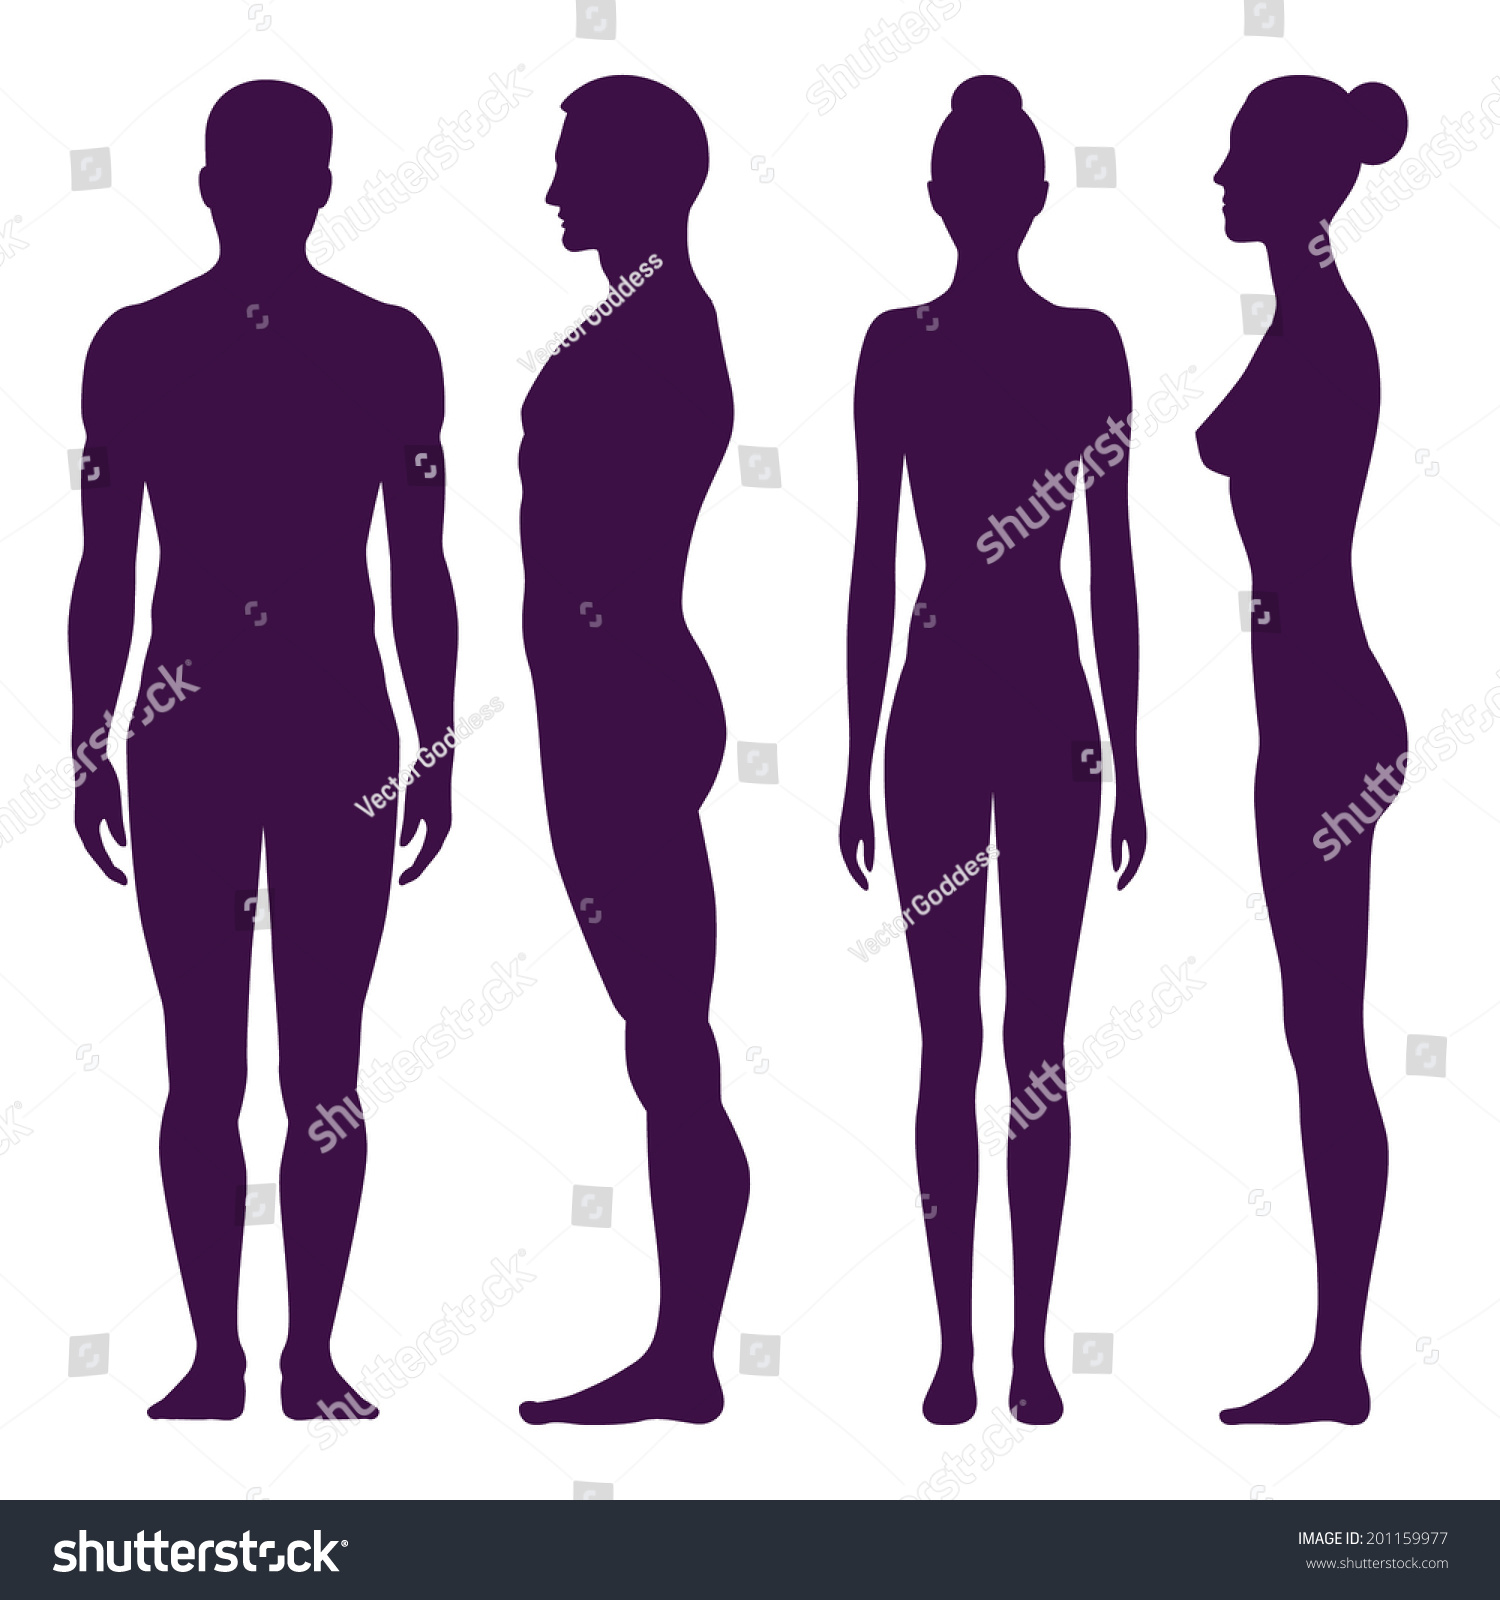 Collection of silhouettes of man and woman in front and side view. Vector illustration, isolated on white background #201159977